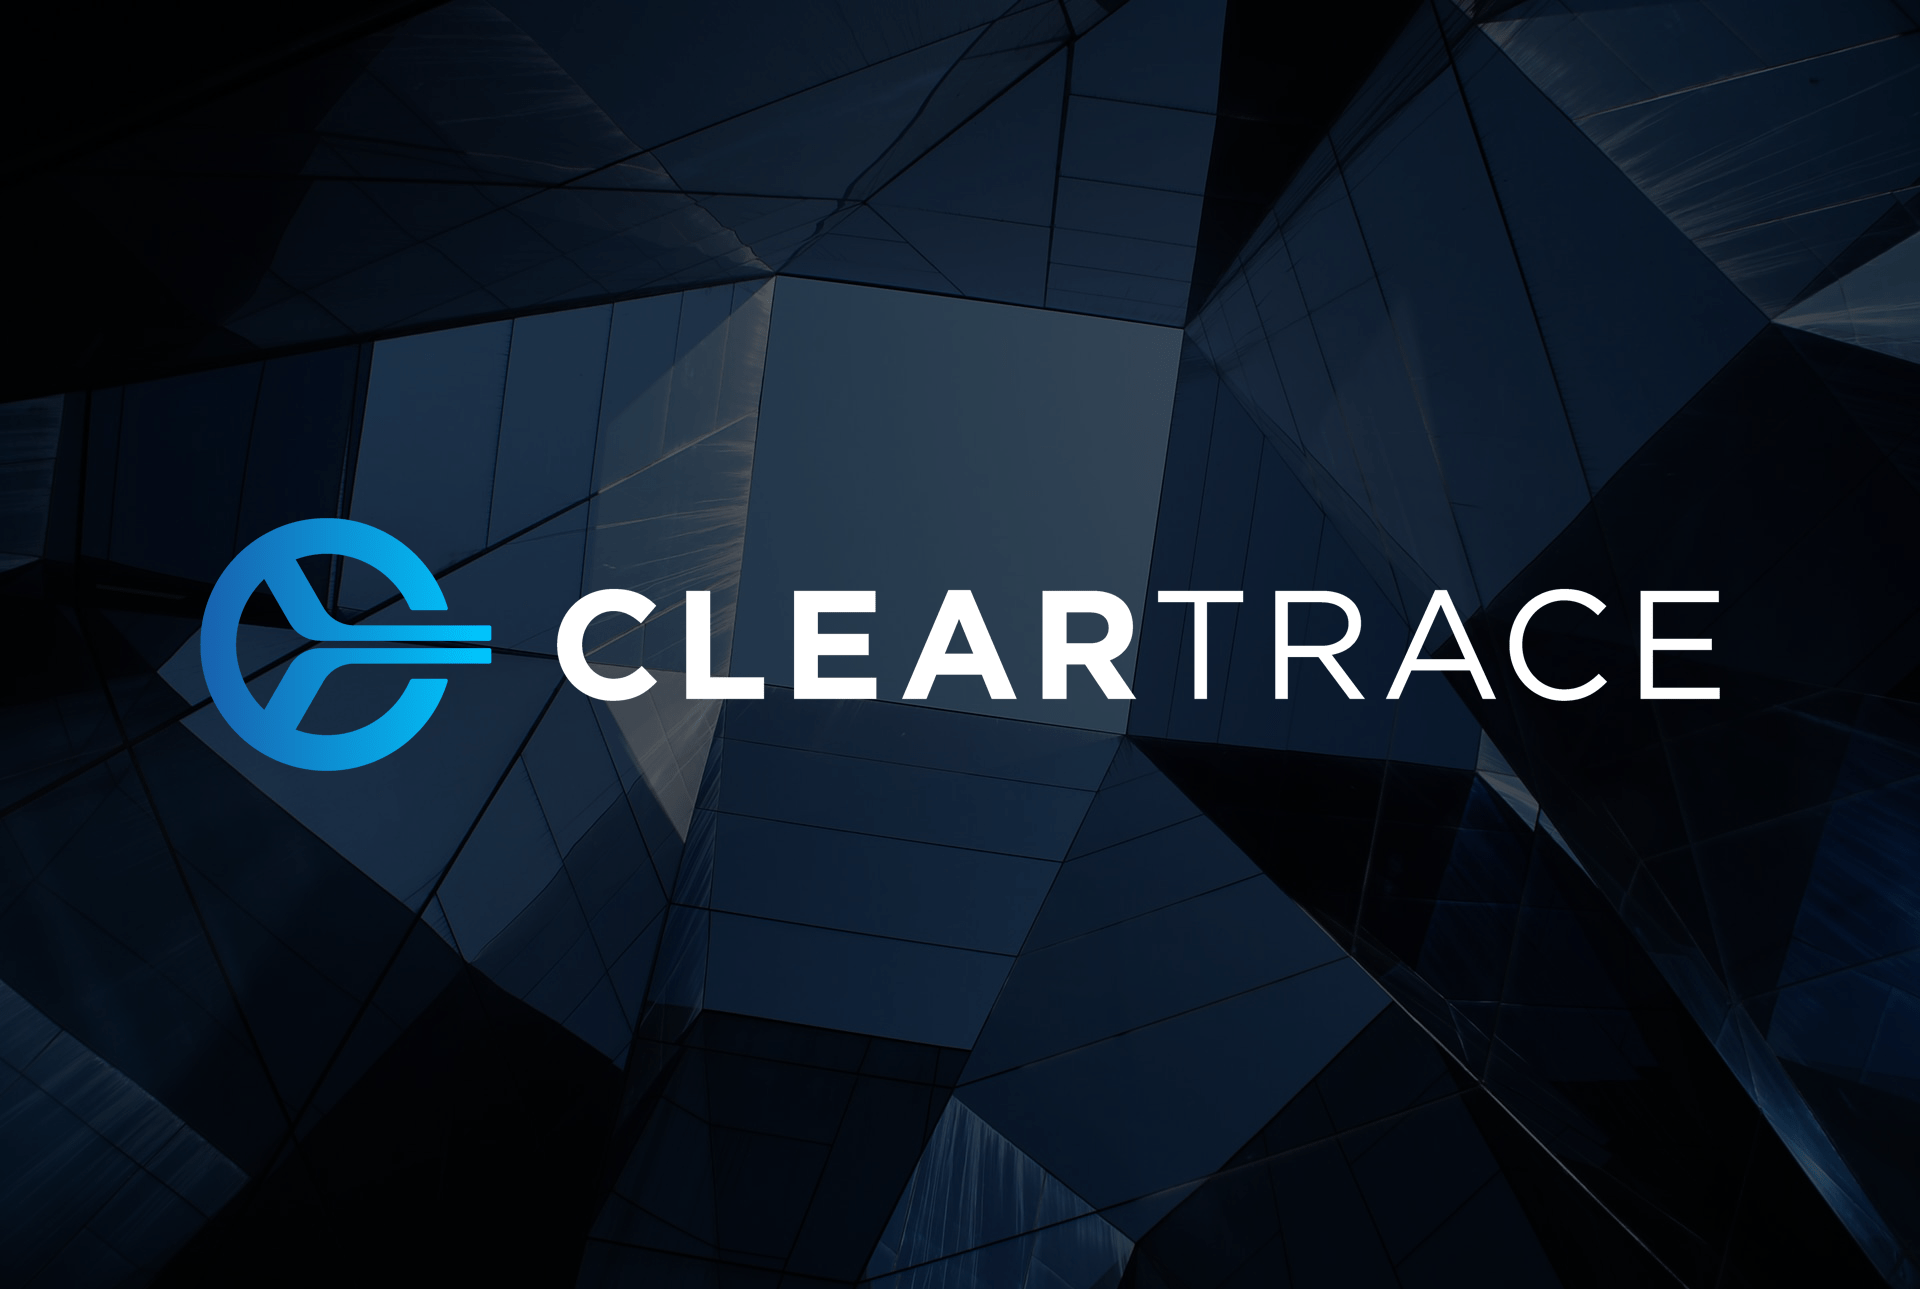 ClearTrace auditable climate accounting software